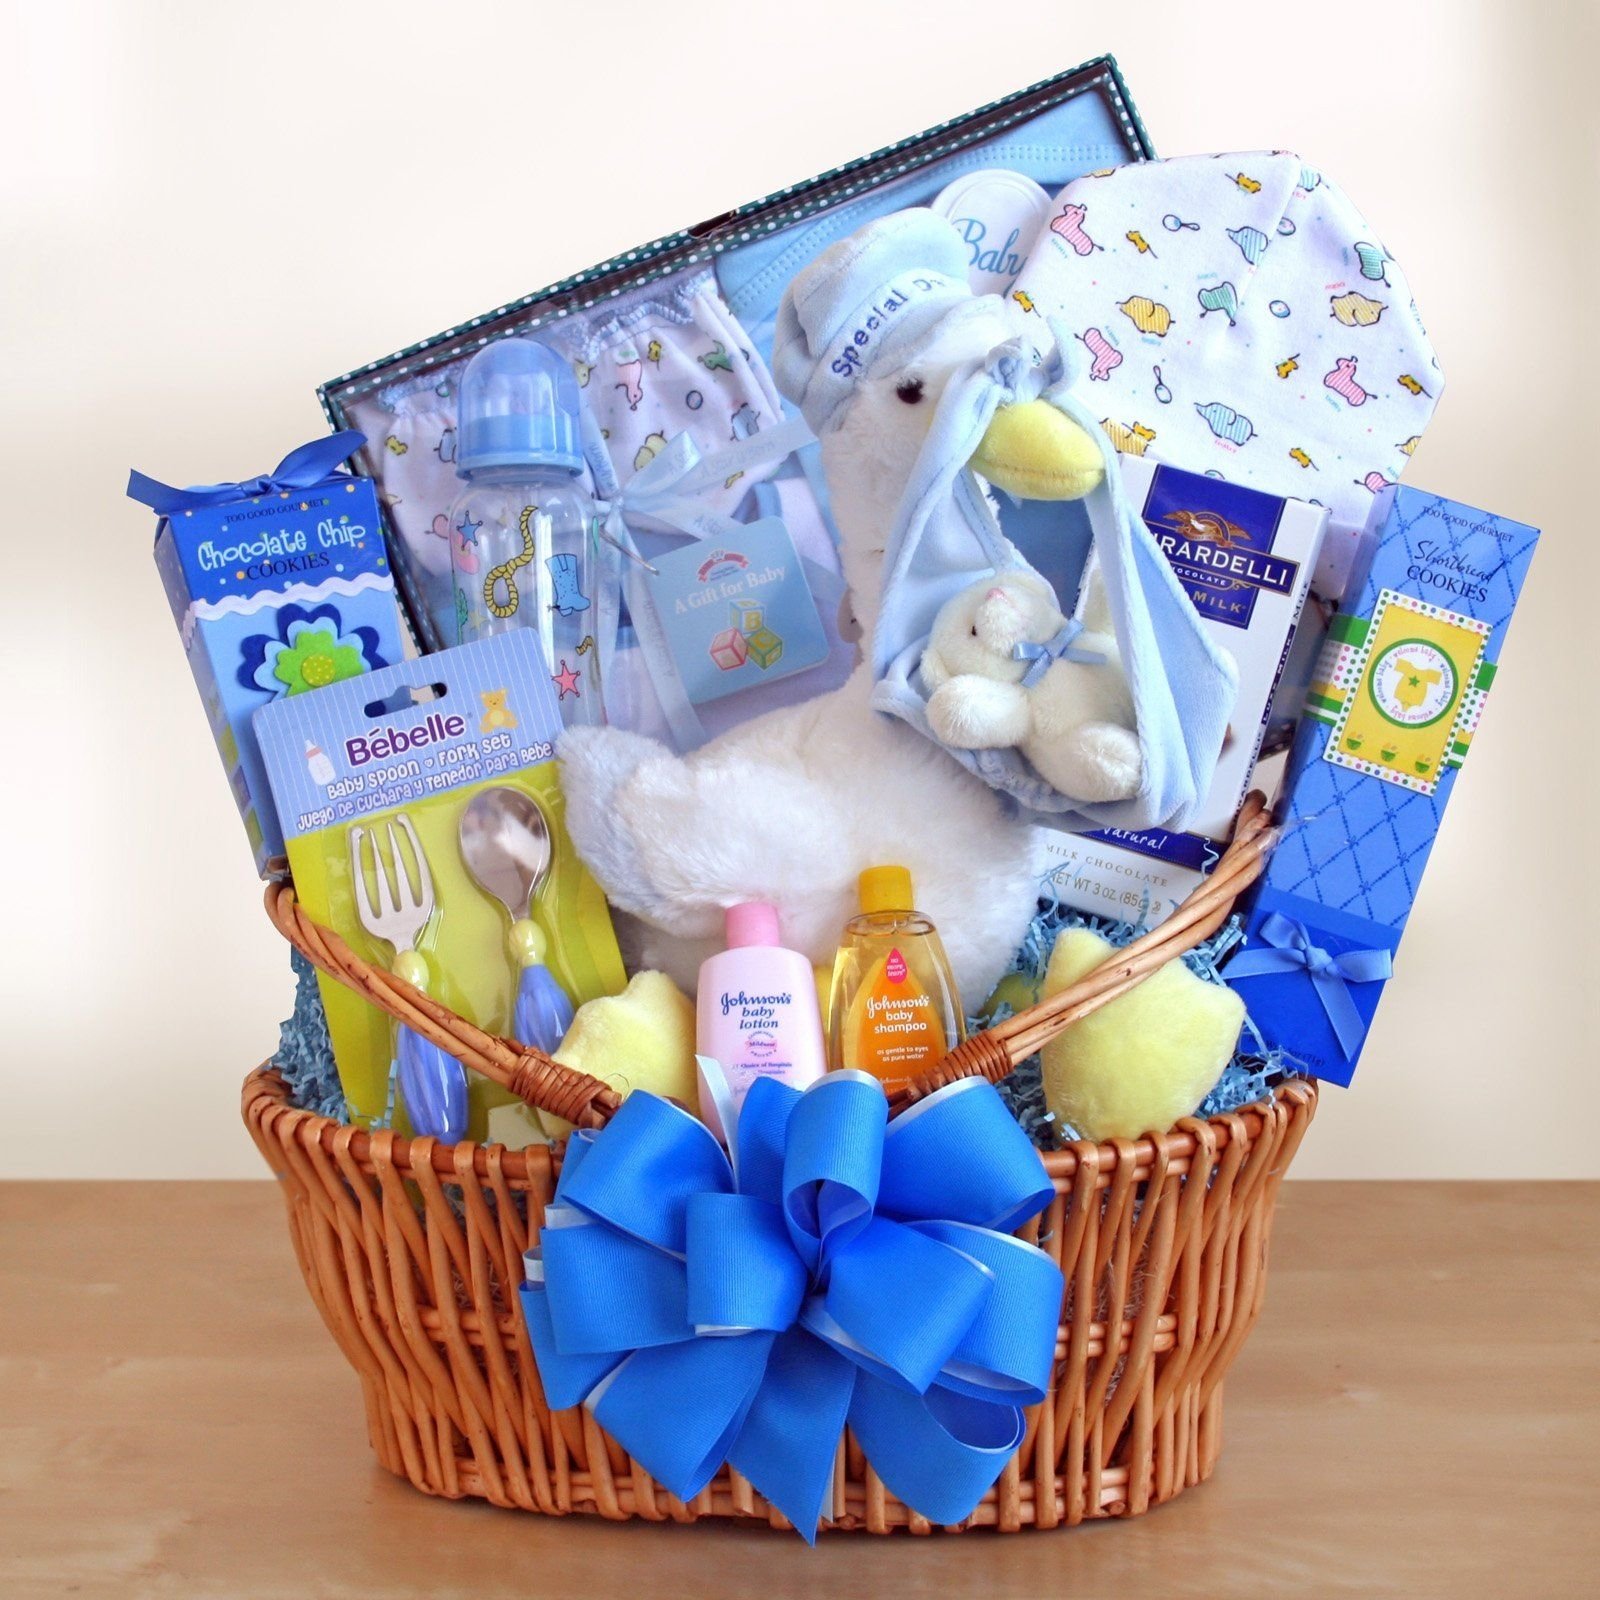 10 Most Recommended Newborn Baby Boy Gift Ideas special stork delivery baby boy gift basket baby shower gift 1 2022